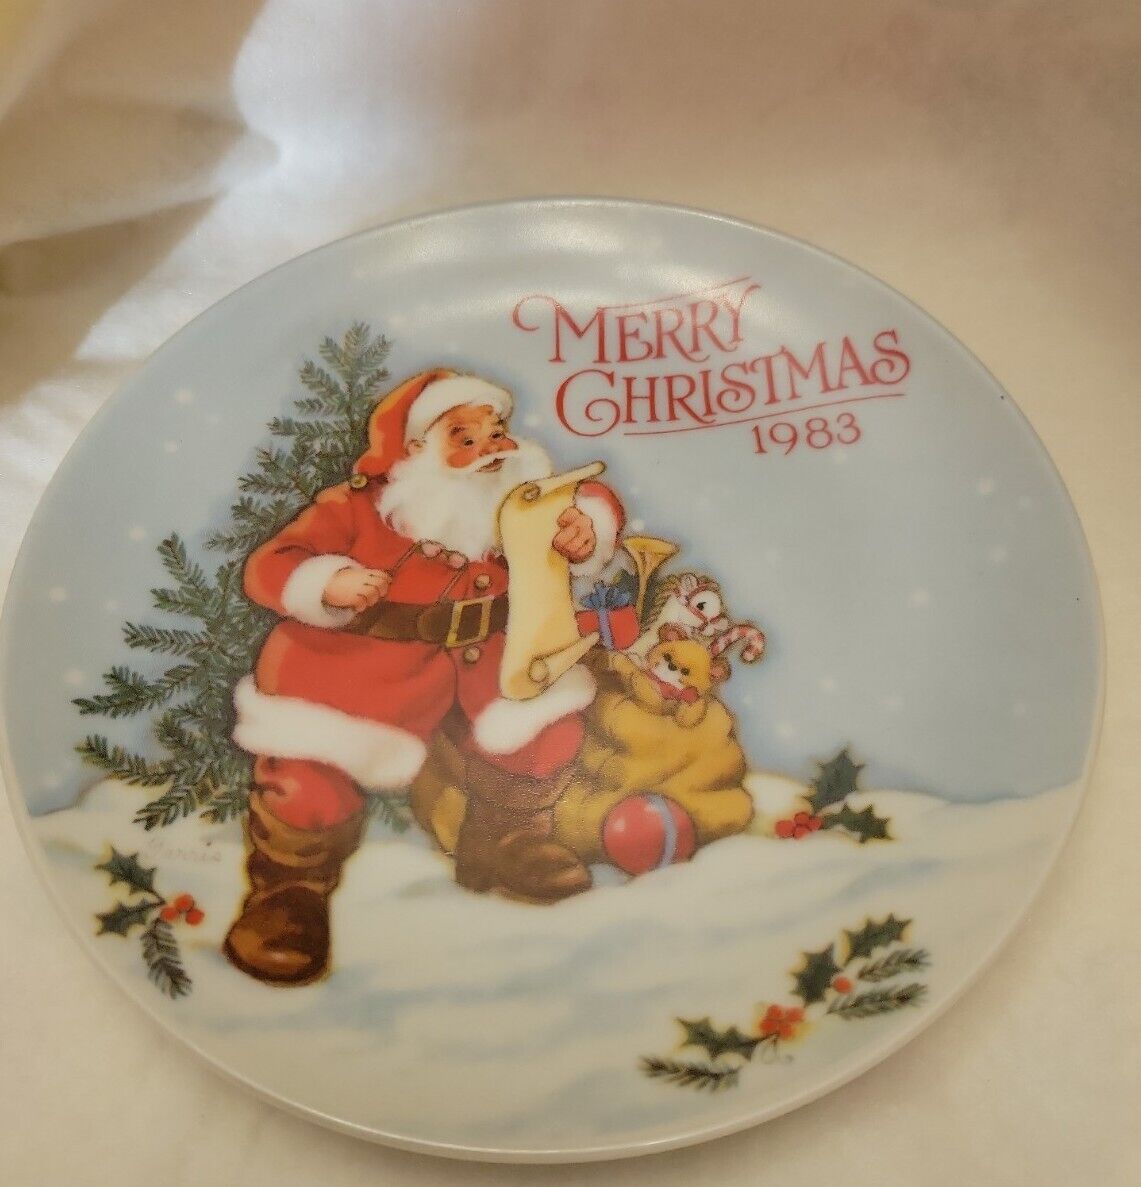 Merry Christmas Decorative Holiday Plate 1983 Gibson Greeting Cards Vintage 